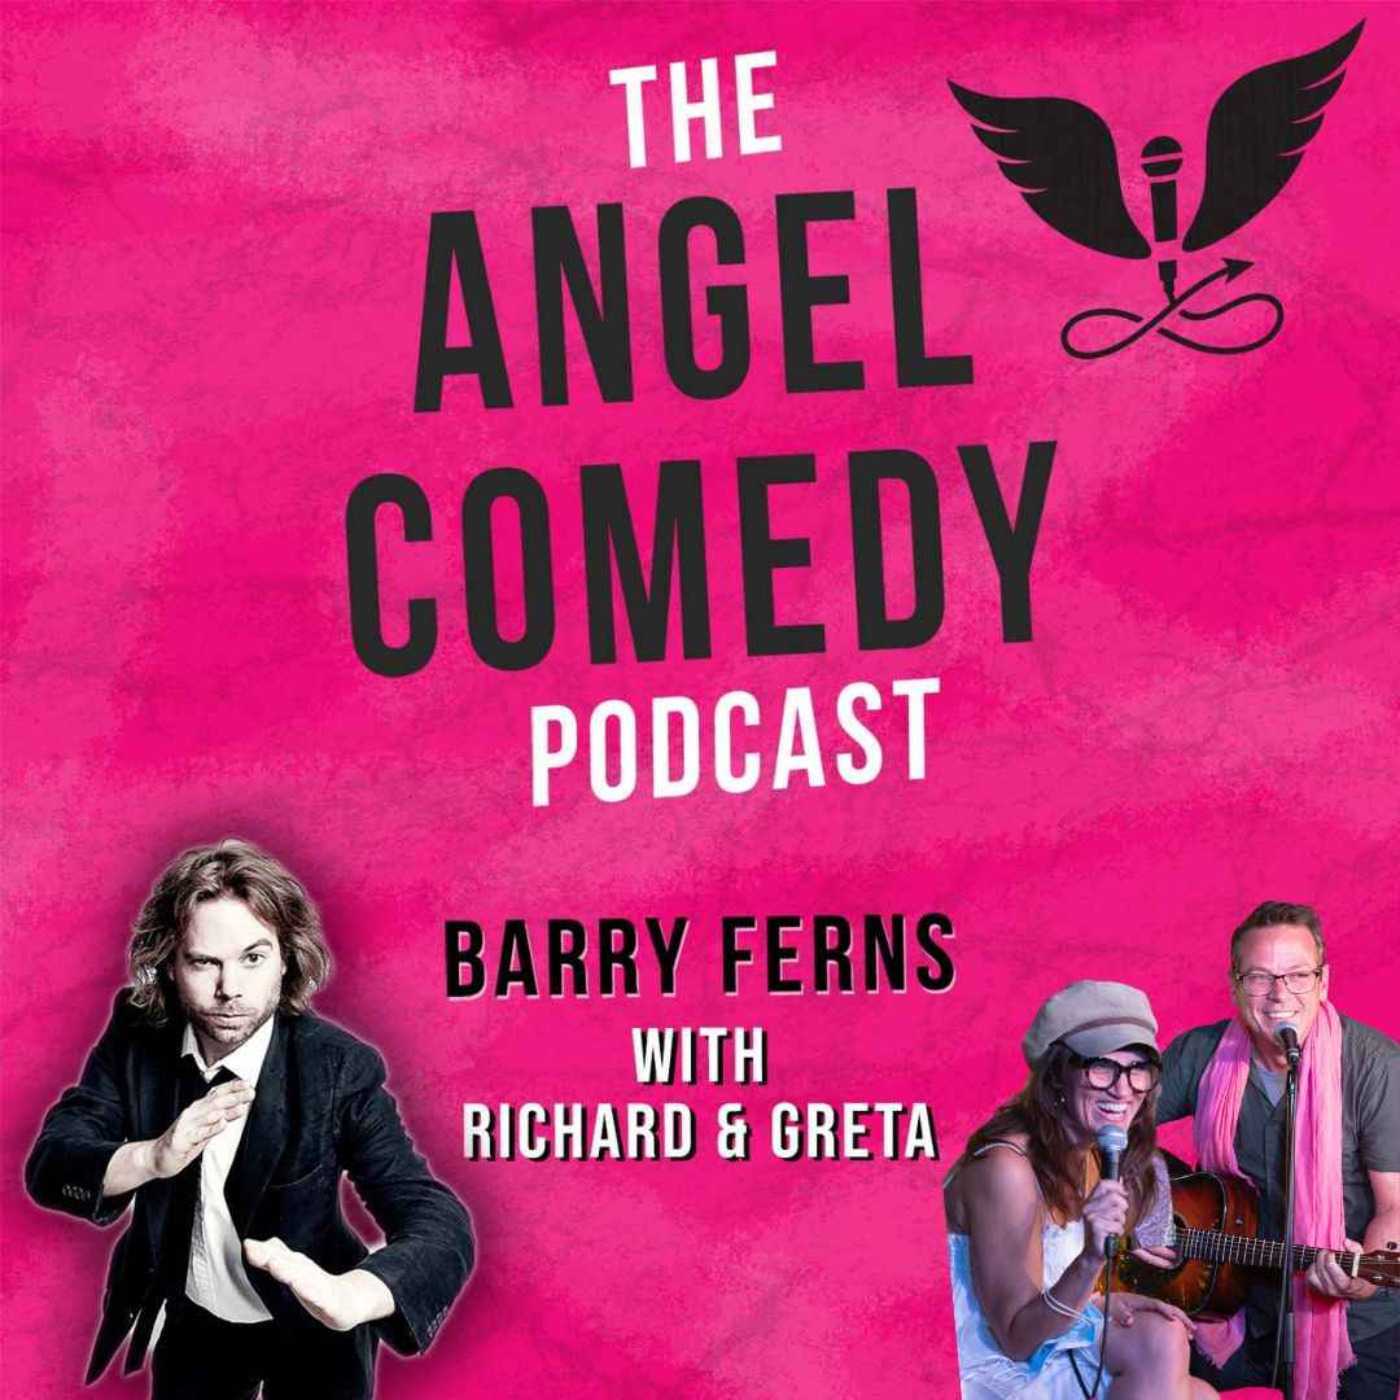 Podcast: The Angel Comedy Podcast with Richard and Greta - Angel Comedy